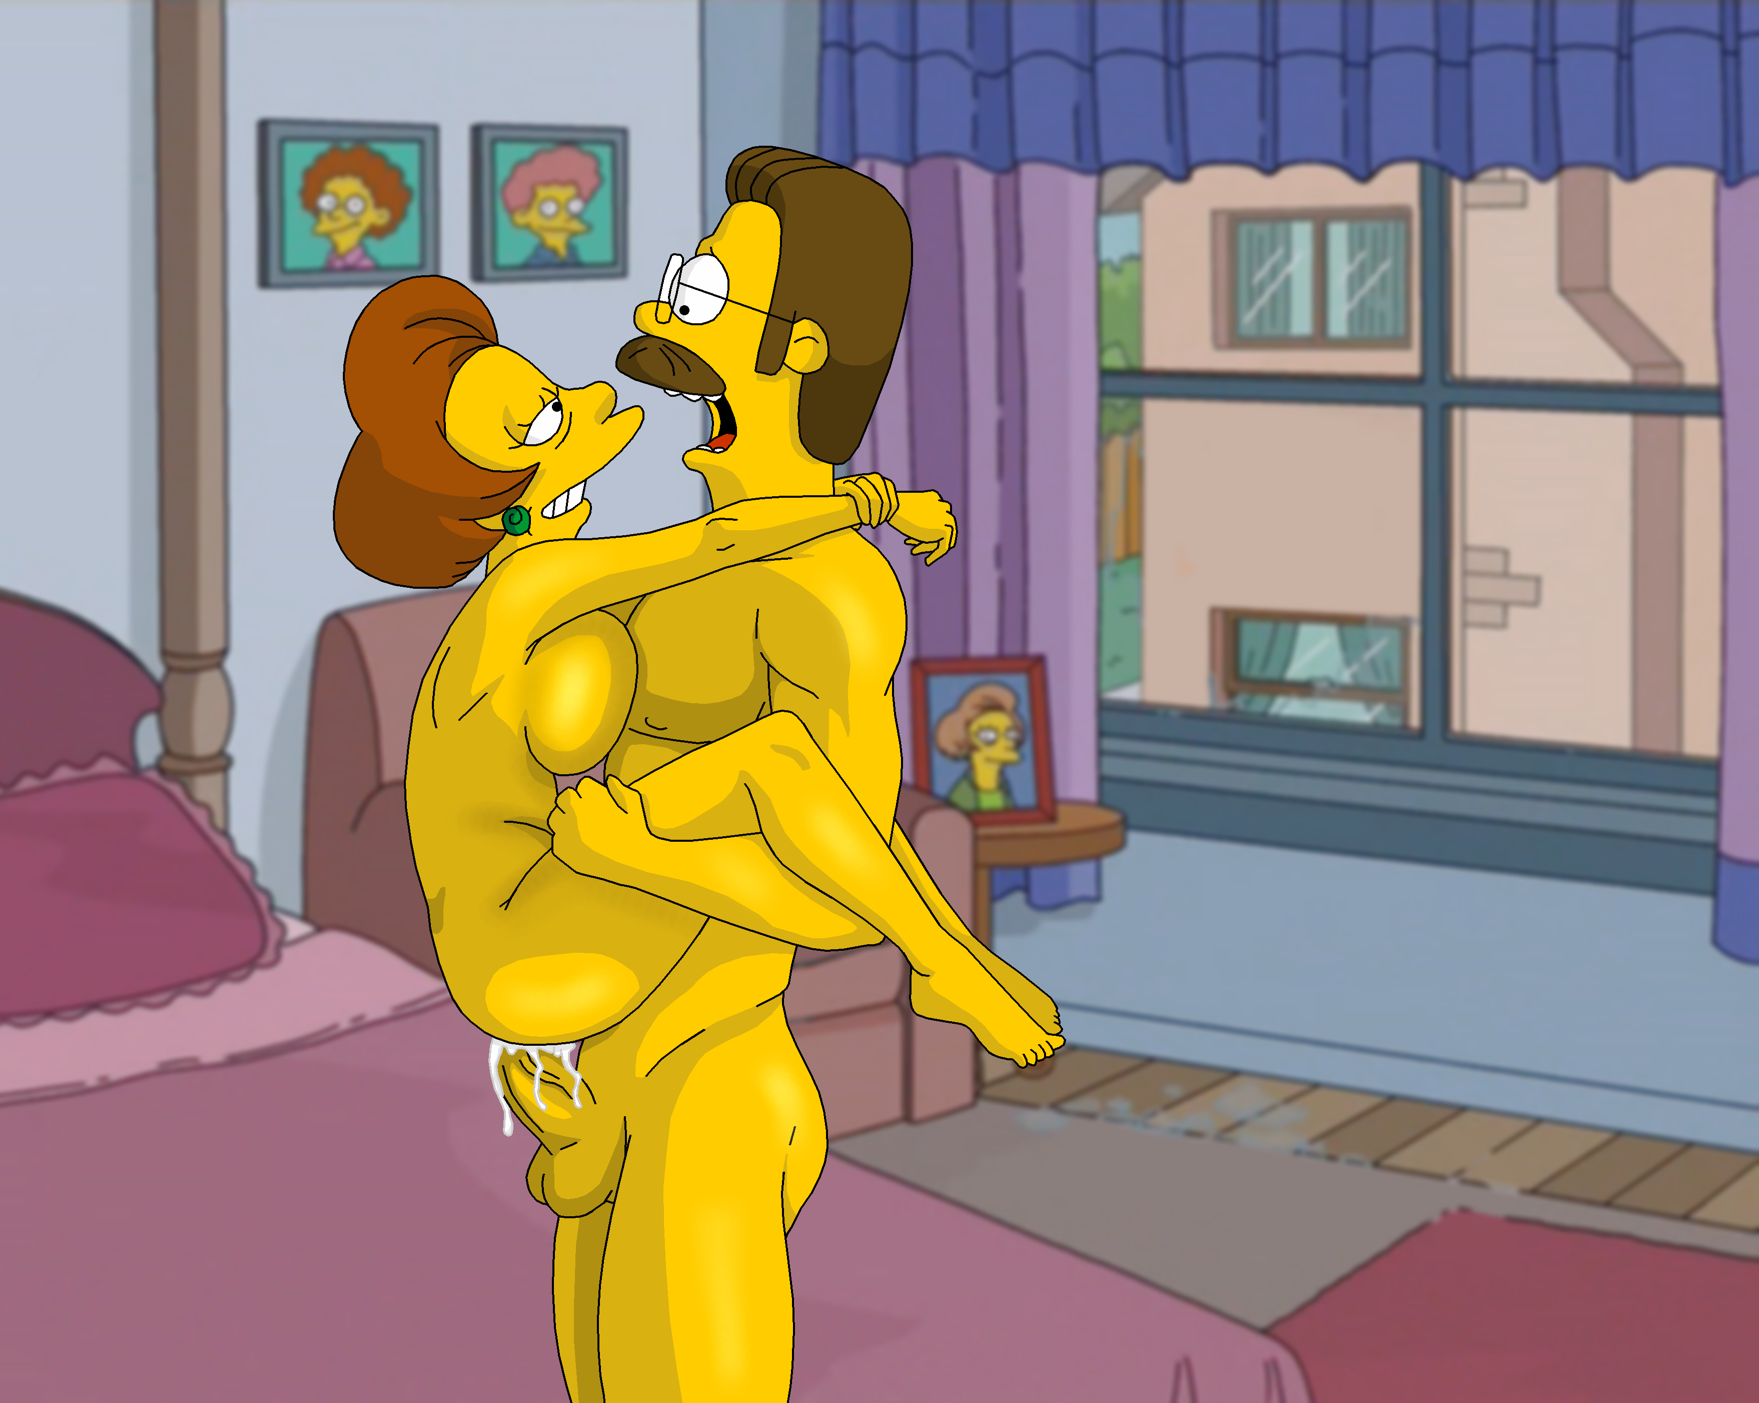 Porno Ned Flanders - Rule34 - If it exists, there is porn of it / edna krabappel, ned flanders /  6012928